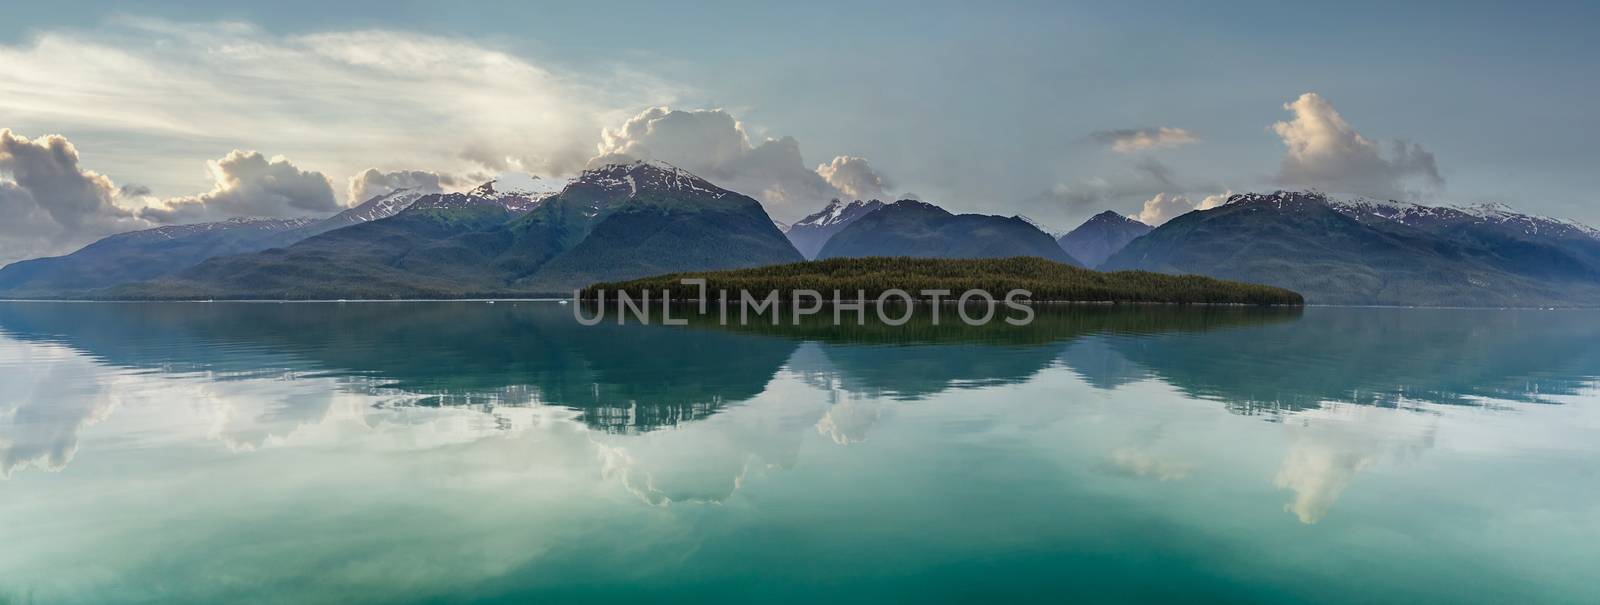 Beautiful landscape of snow capped mountains and a lone island full of green trees in a fjord in Alaska, USA. Cloudy sunset sky as a background. Mountains and sky reflecting in the water by DamantisZ